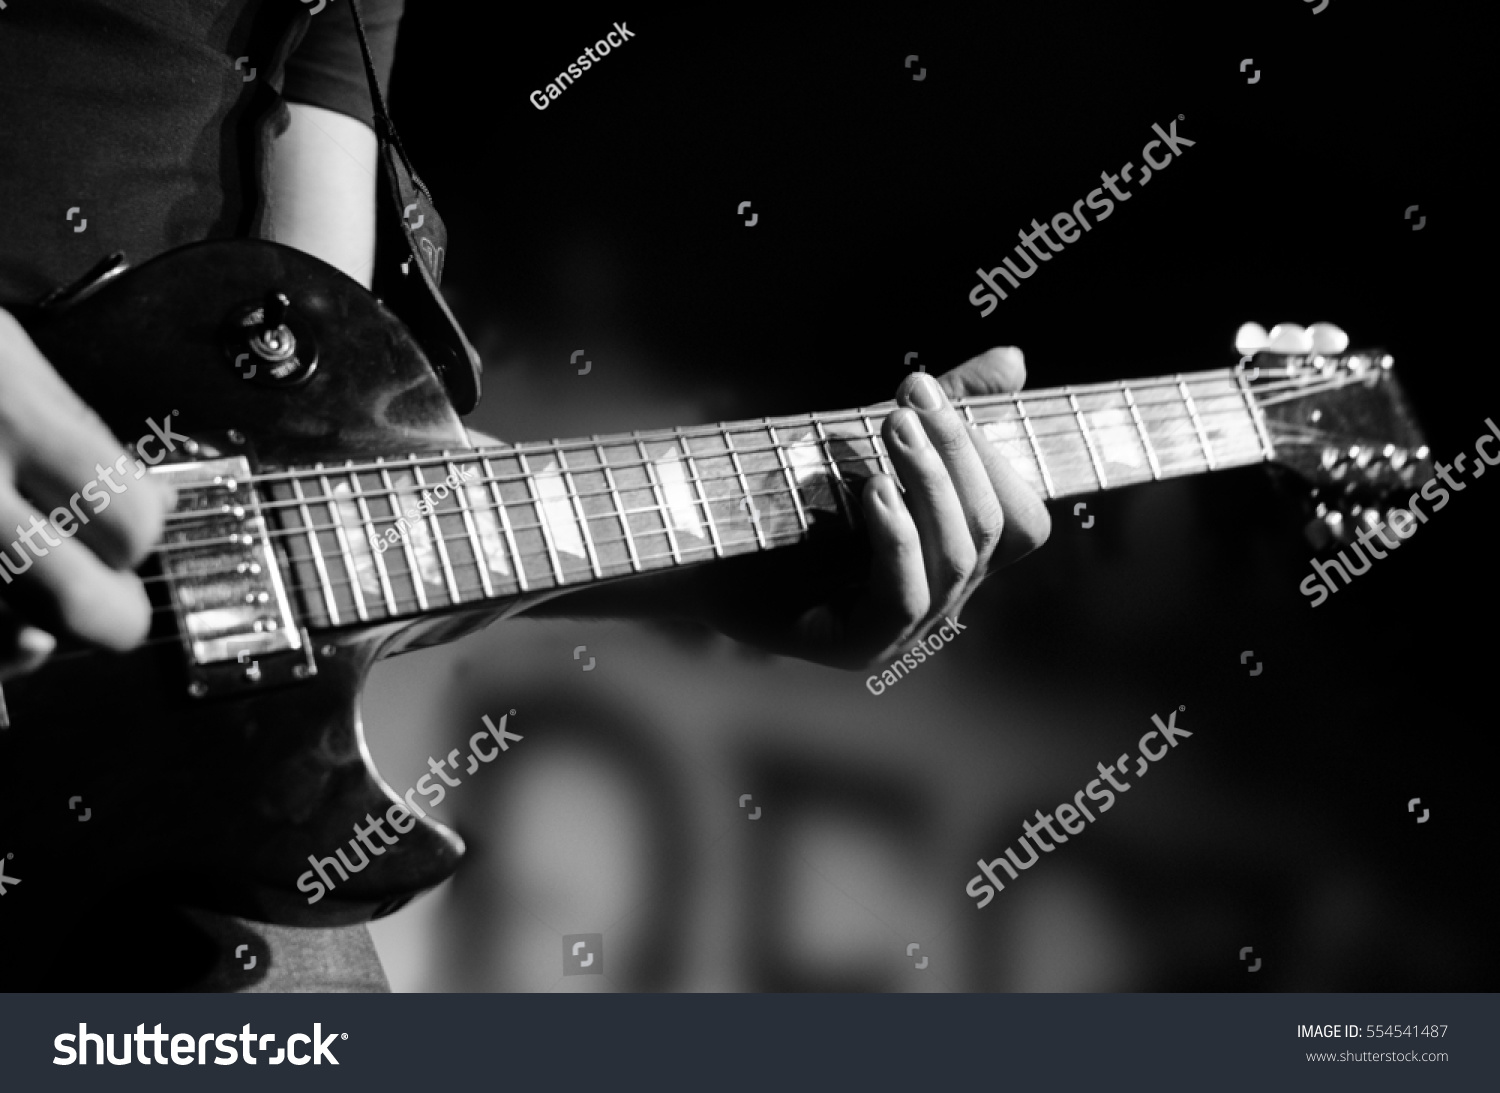 Guitar neck close-up on a concert of rock music in the hands of a musician #554541487